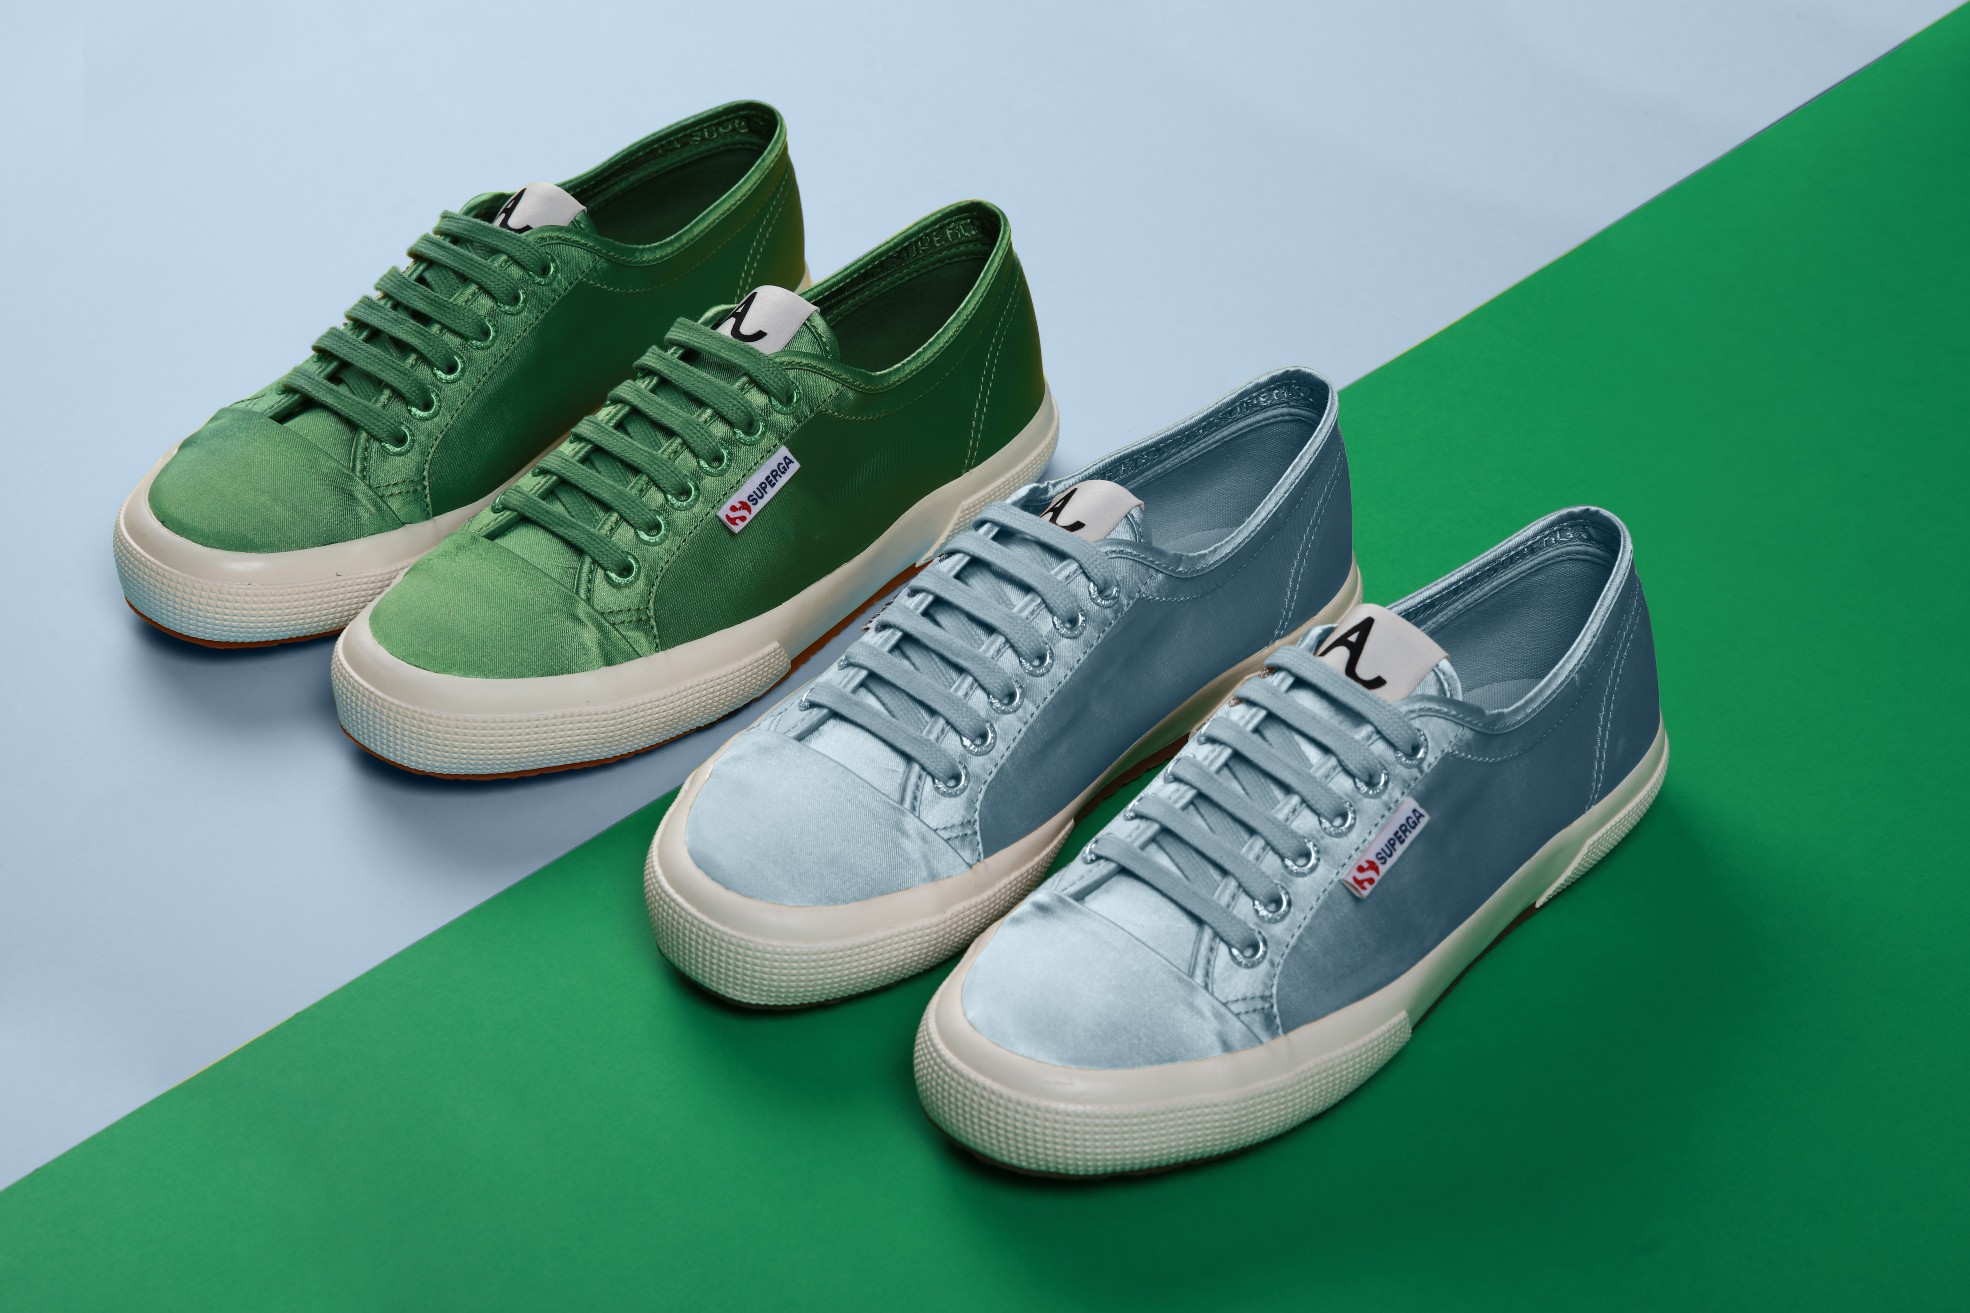 You can get Superga sneakers at up to 70% off in their 4-day flash sale from 14 – 17 Mar 2019 - 2